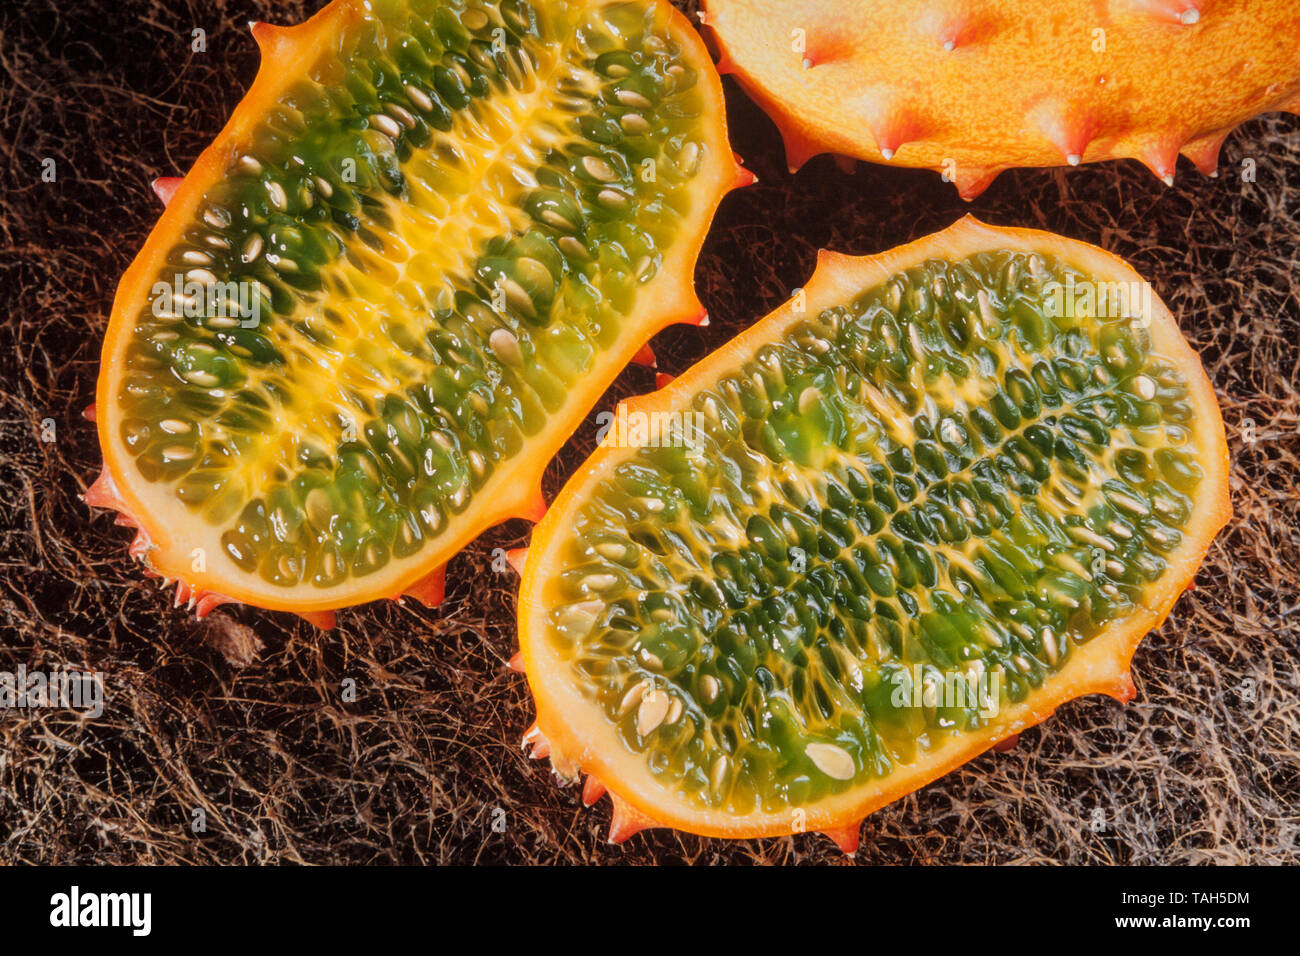 African Horned melon, 'Kiwano' Cucumis melo, outer skin and interior greenish flash. Stock Photo